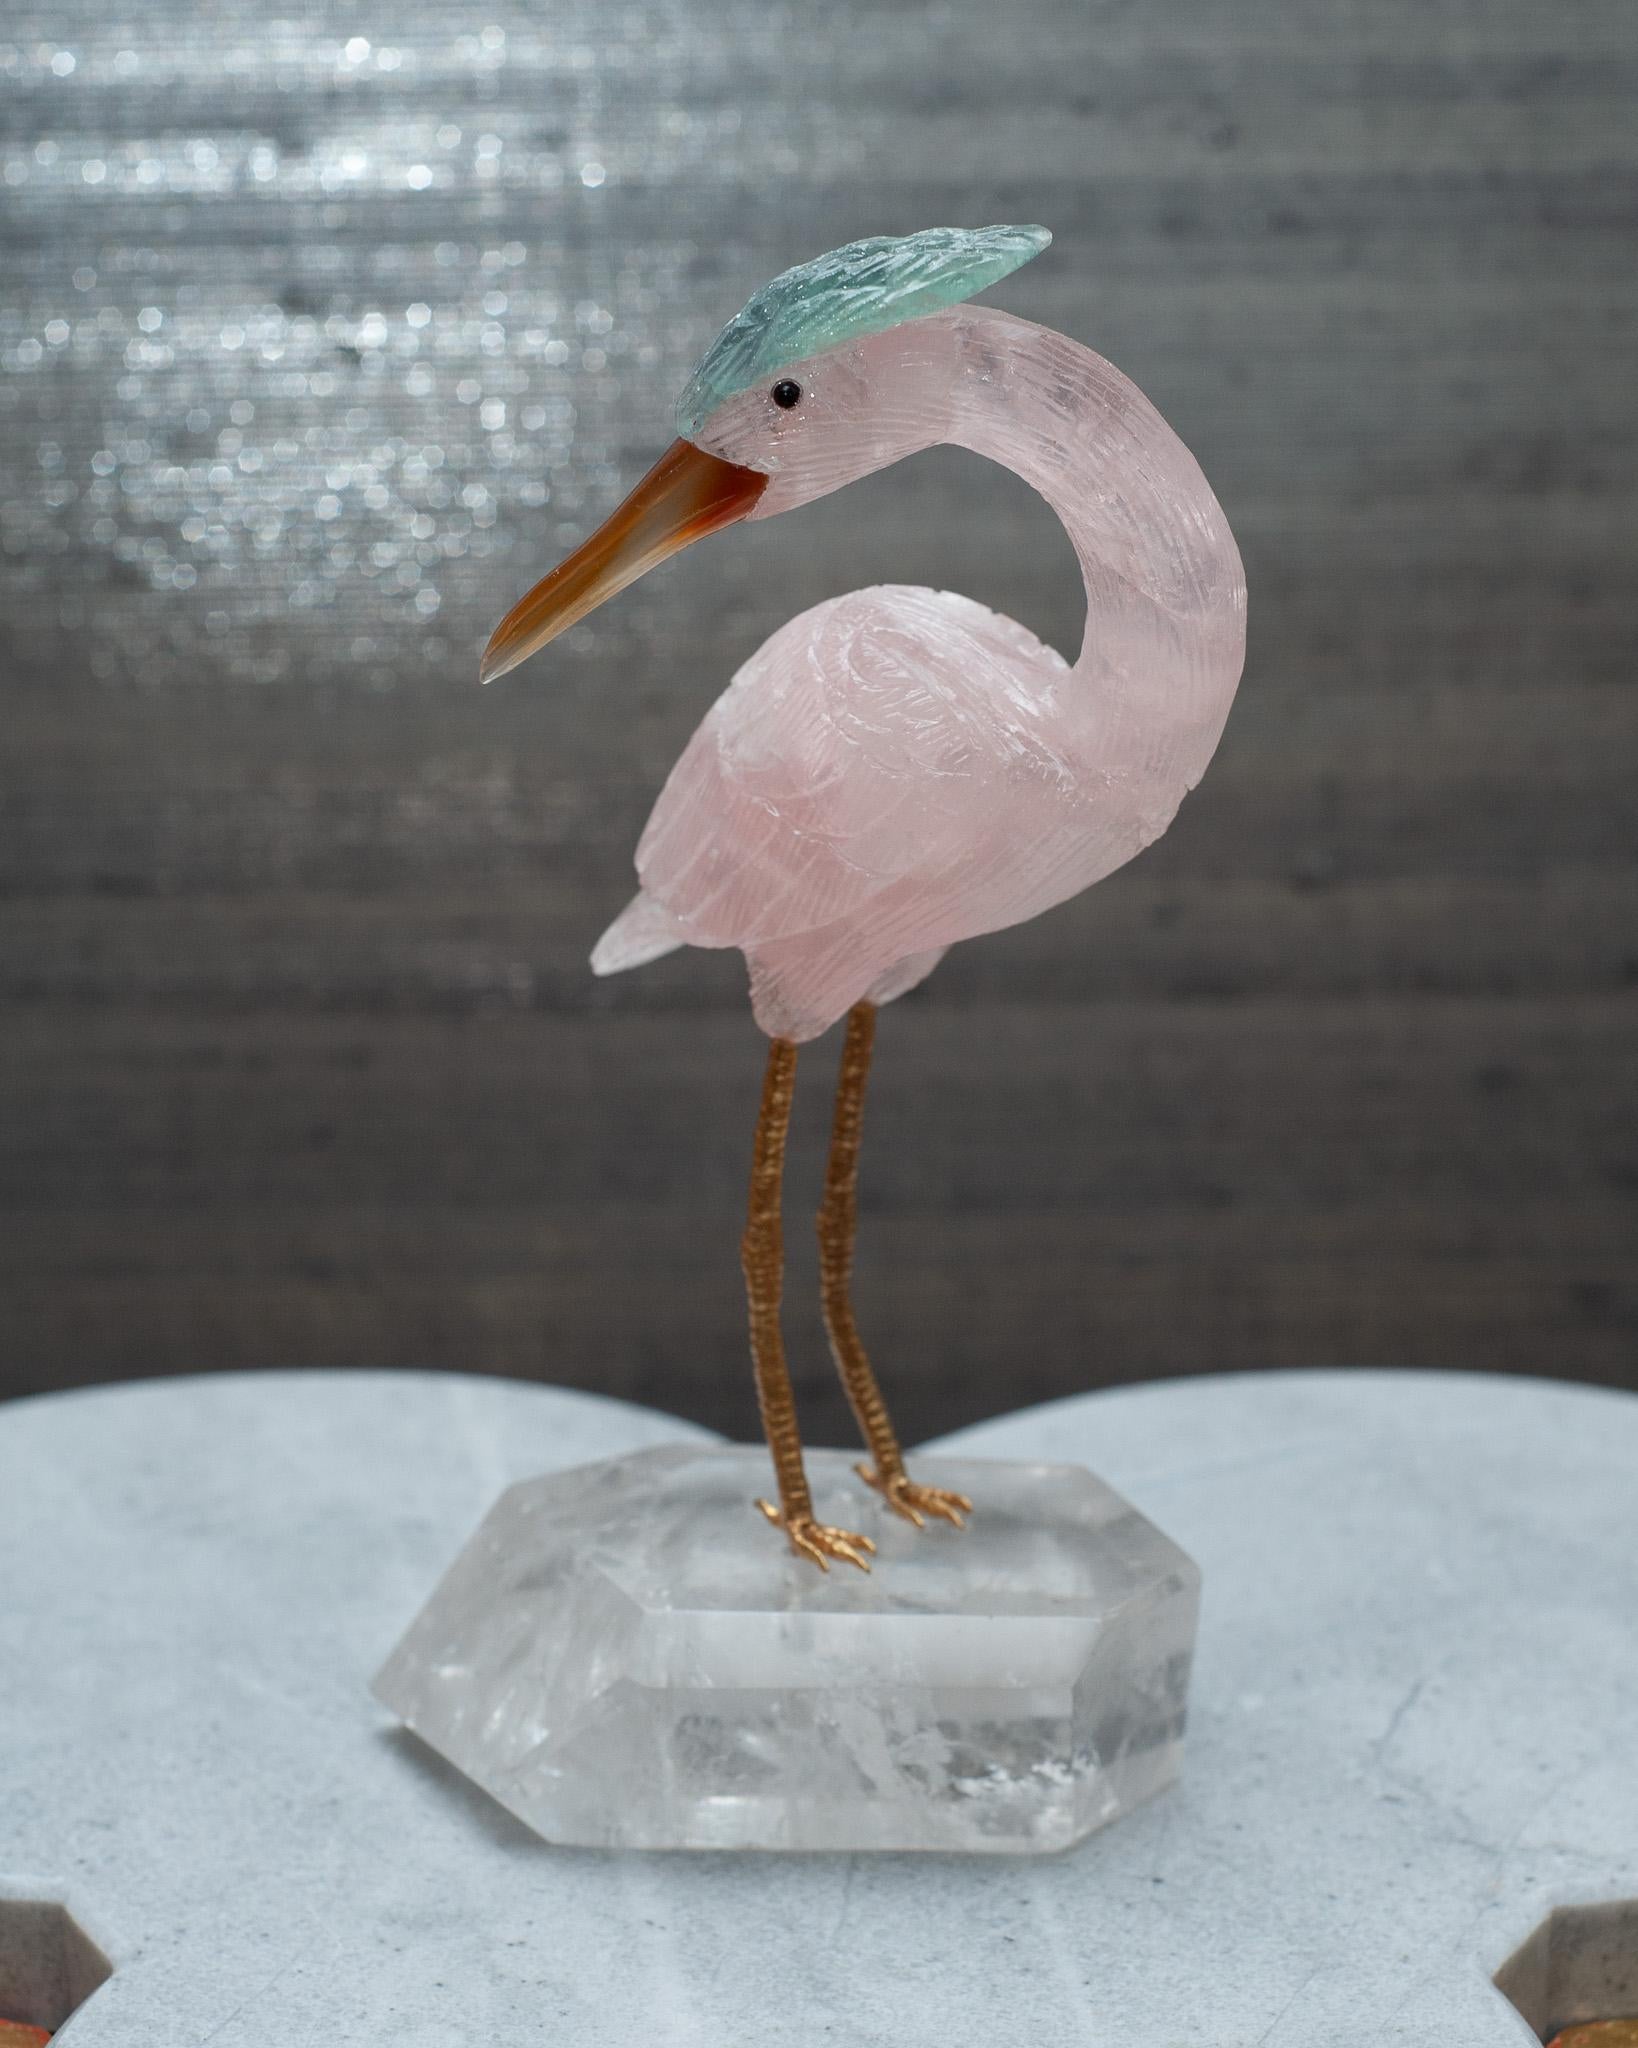 A beautiful hand carved semi precious rose quartz stone crane with carnelian beak, fluorite crest, and brass legs. This piece is mounted on a faceted rock crystal quartz mineral specimen base. This exotic bird is a decorative combination of